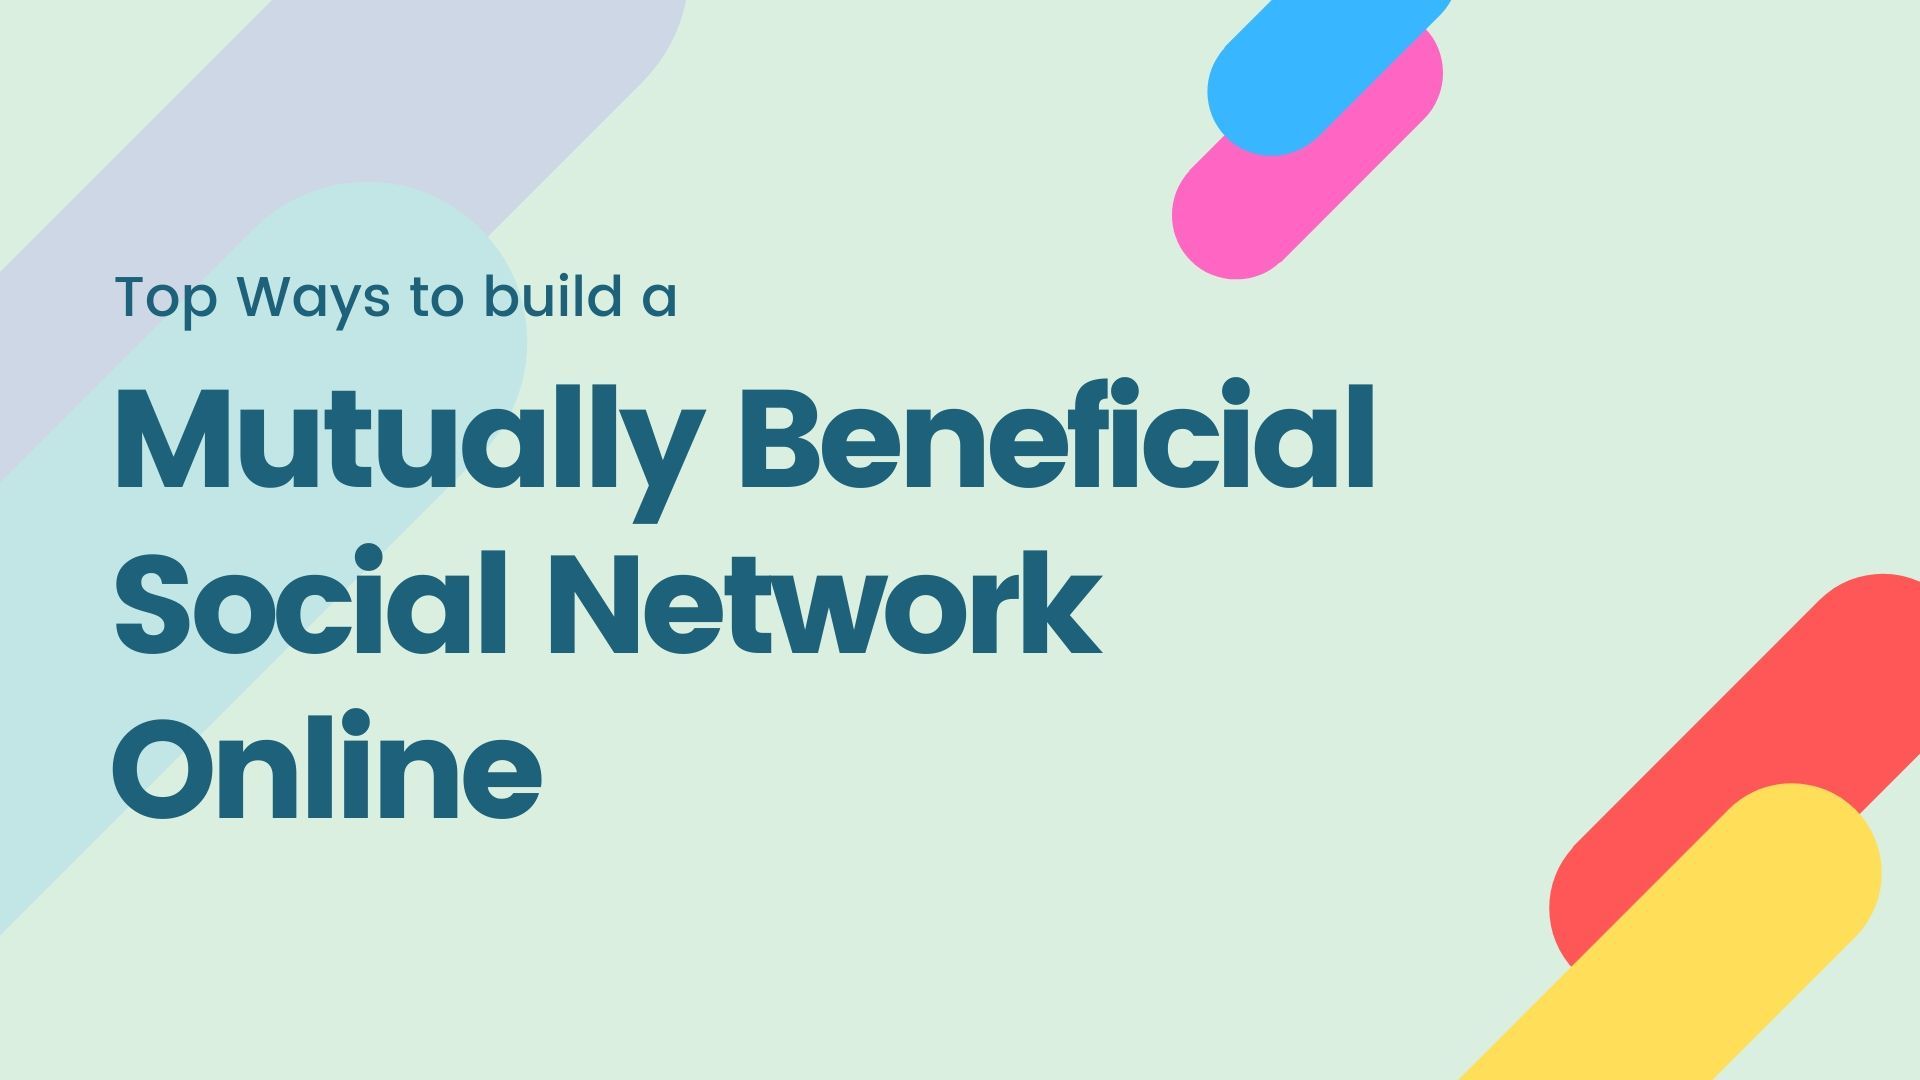 Top Ways to Build a Mutually Beneficial Social Network Online